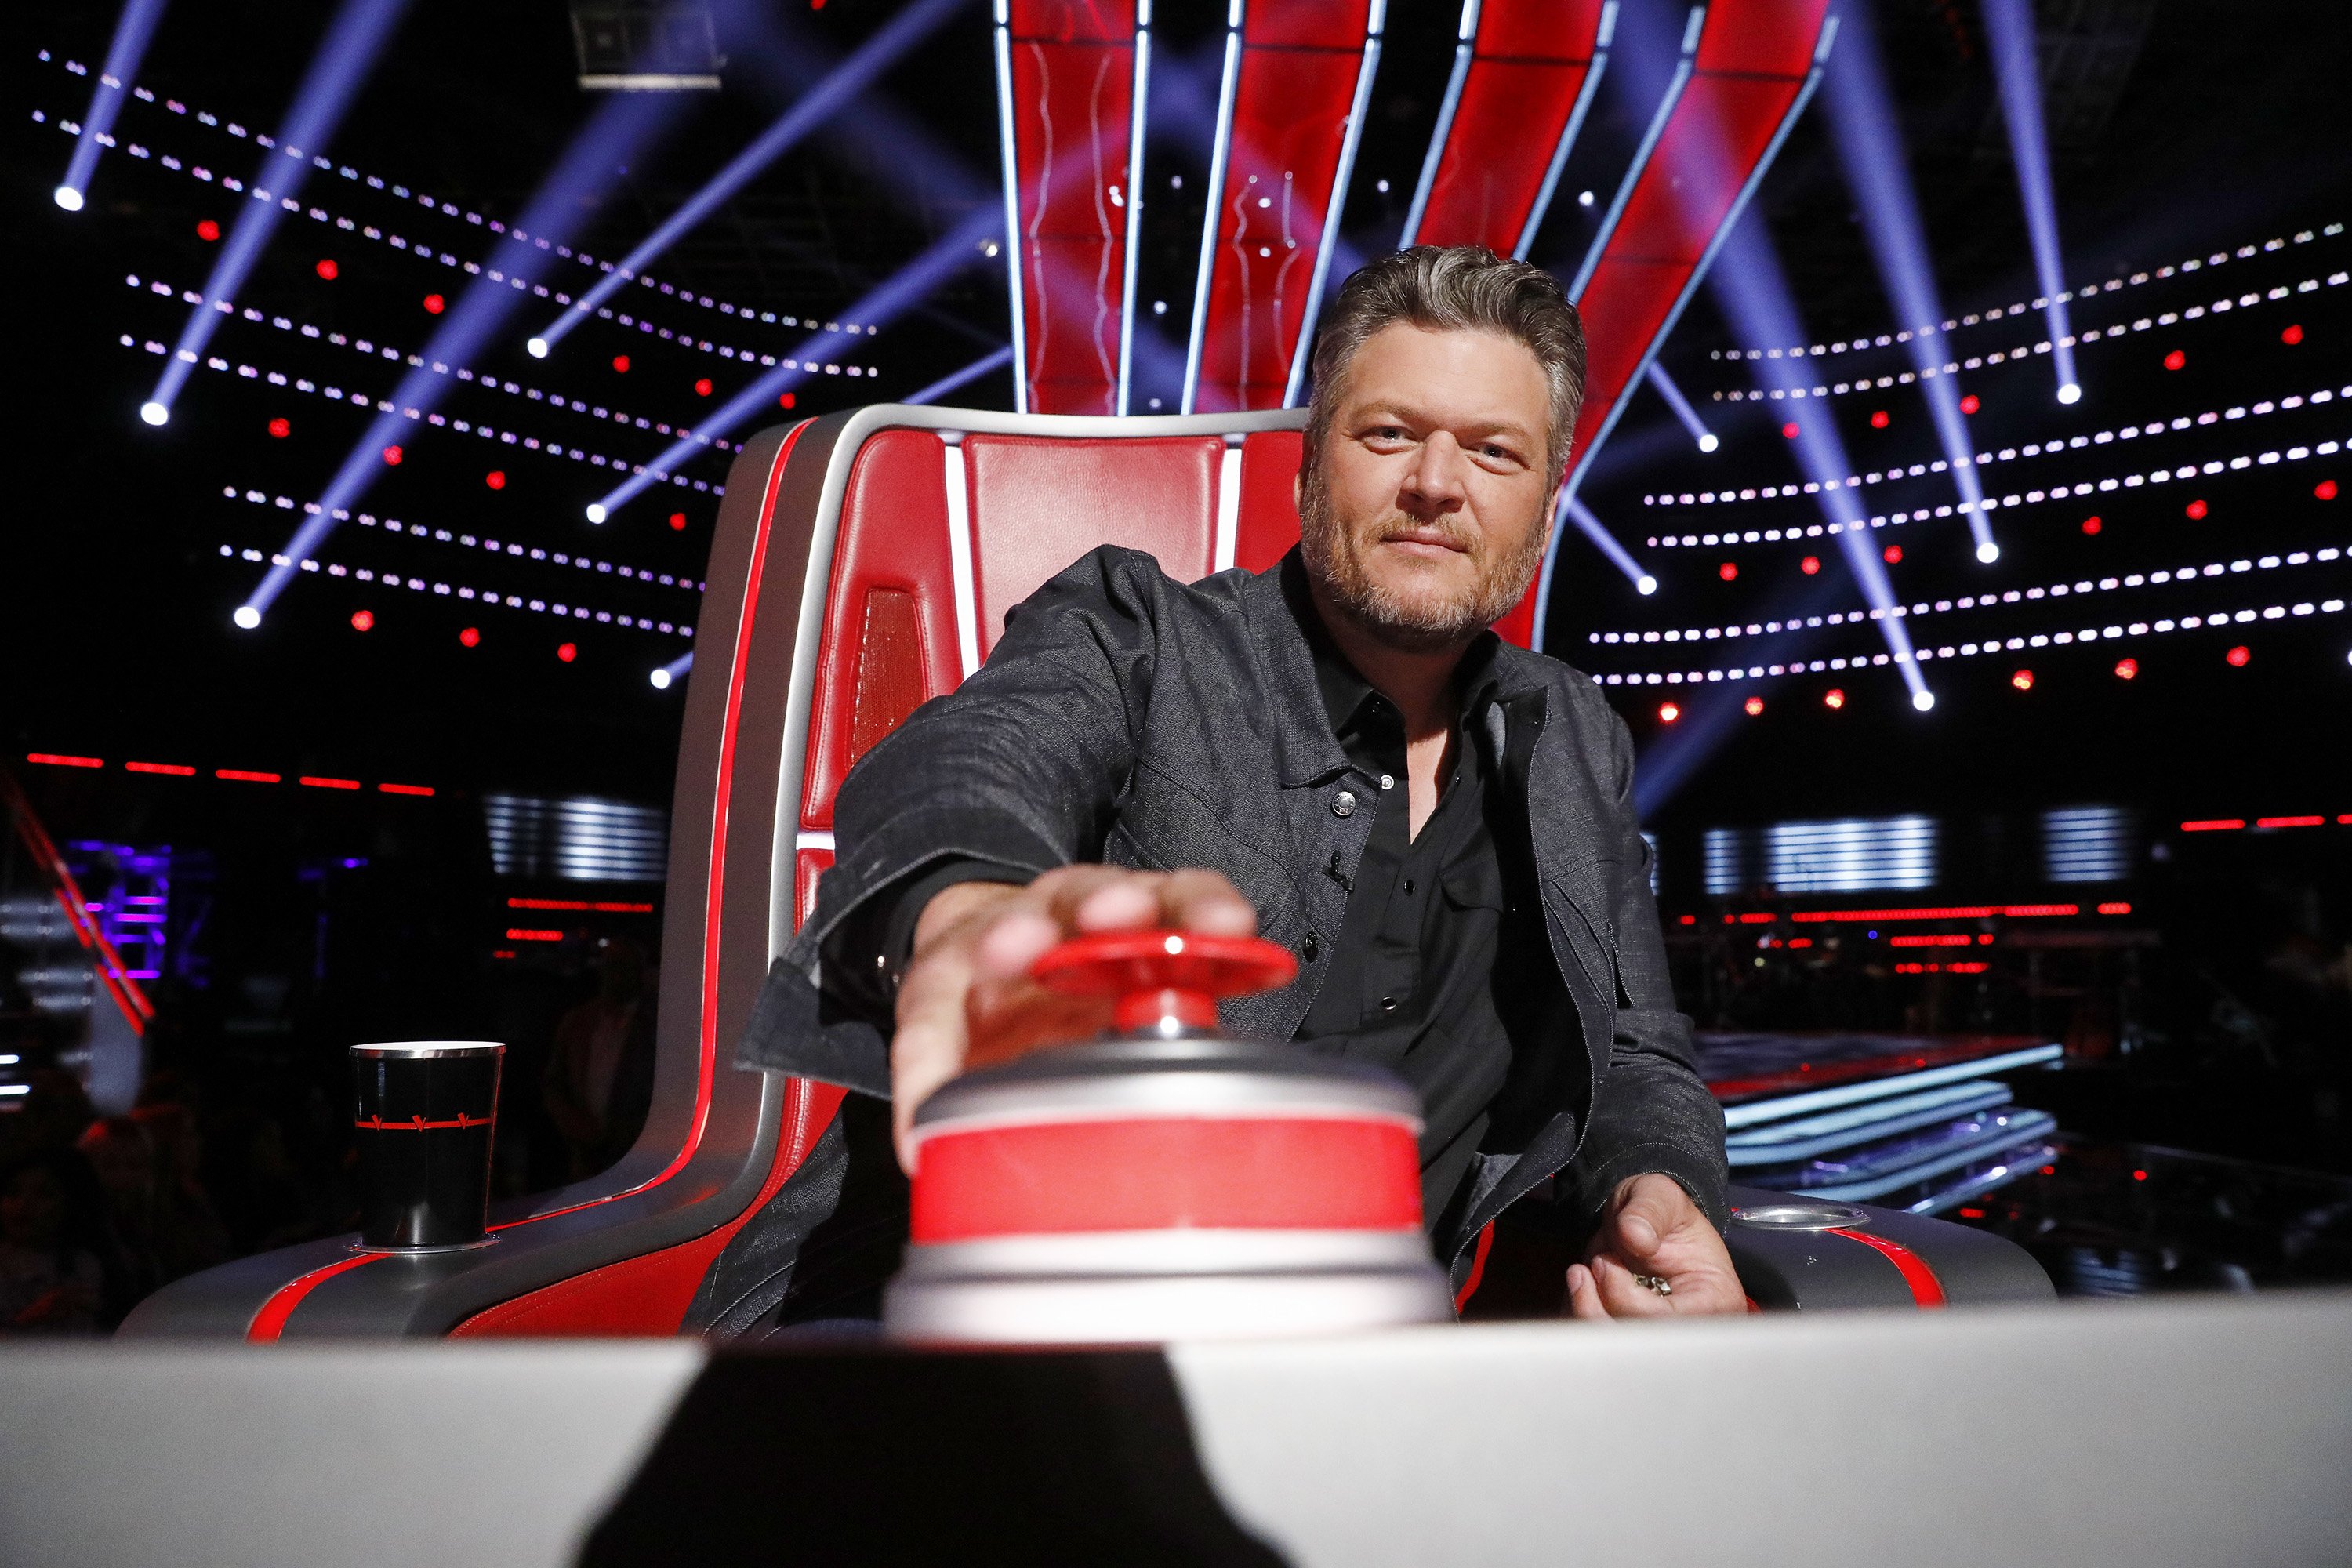 Blake Shelton during the blind auditions of the 18th season of "The Voice." | Source: Getty Images.